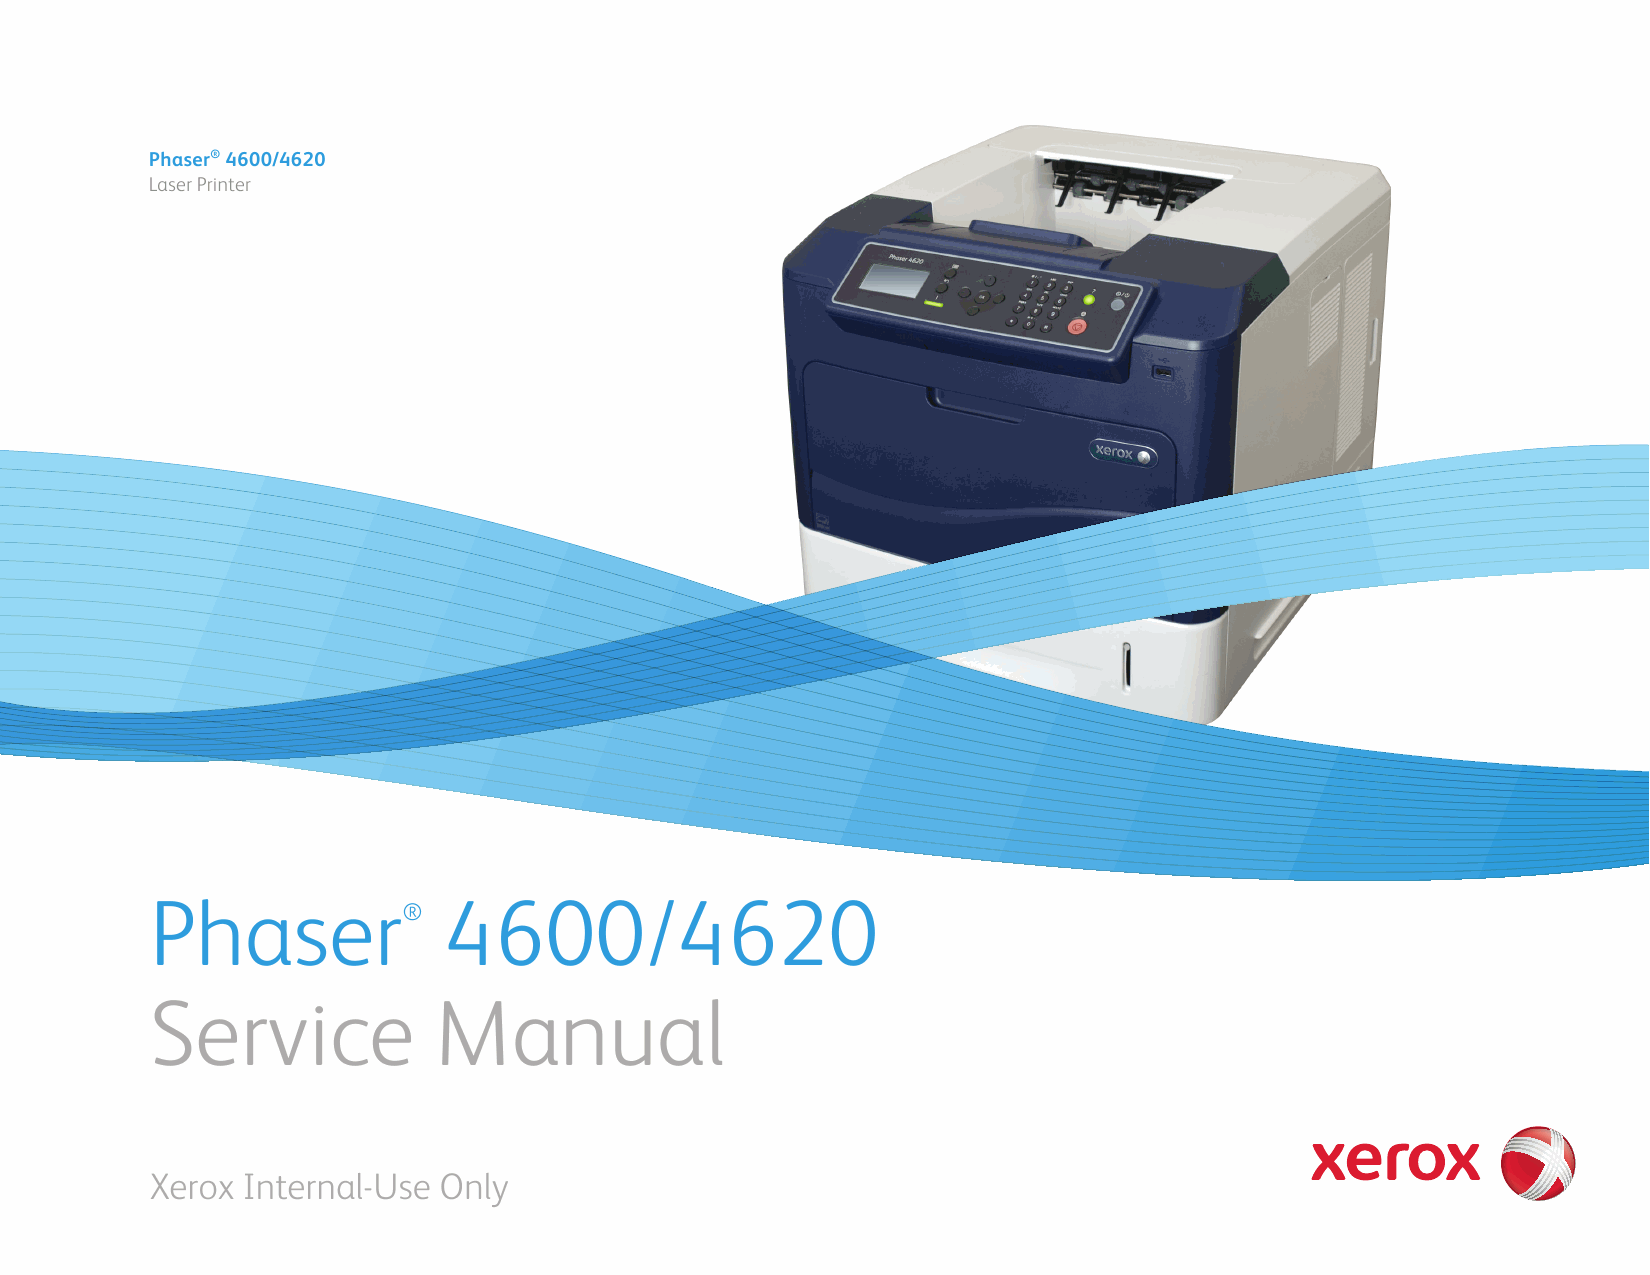 Xerox Phaser 4600 4620 Parts List and Service Manual-1